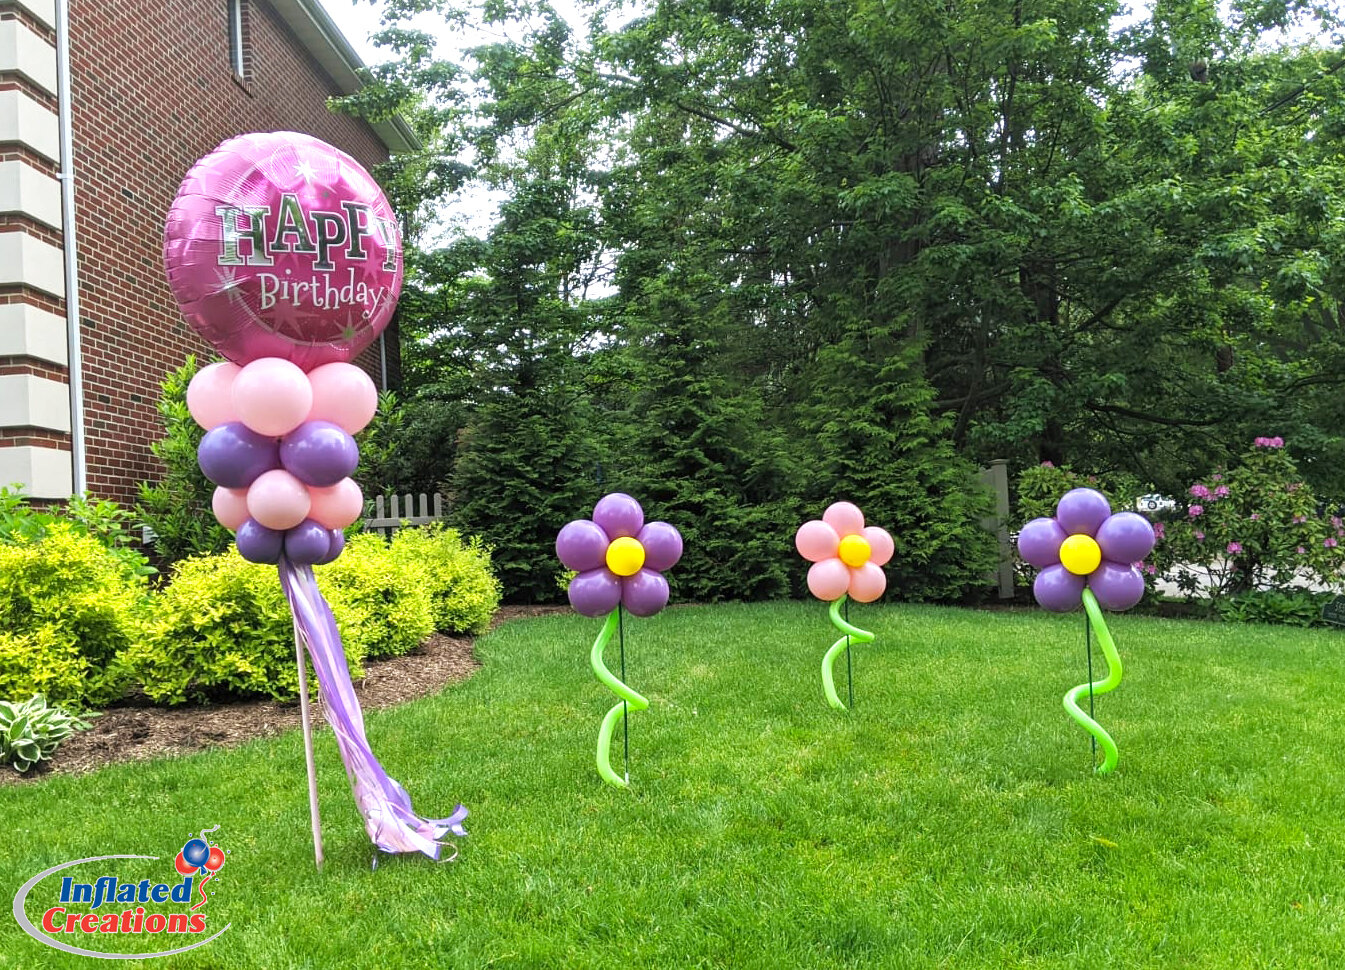 Creating Memories NY - Magical Butterfly balloon bouquet